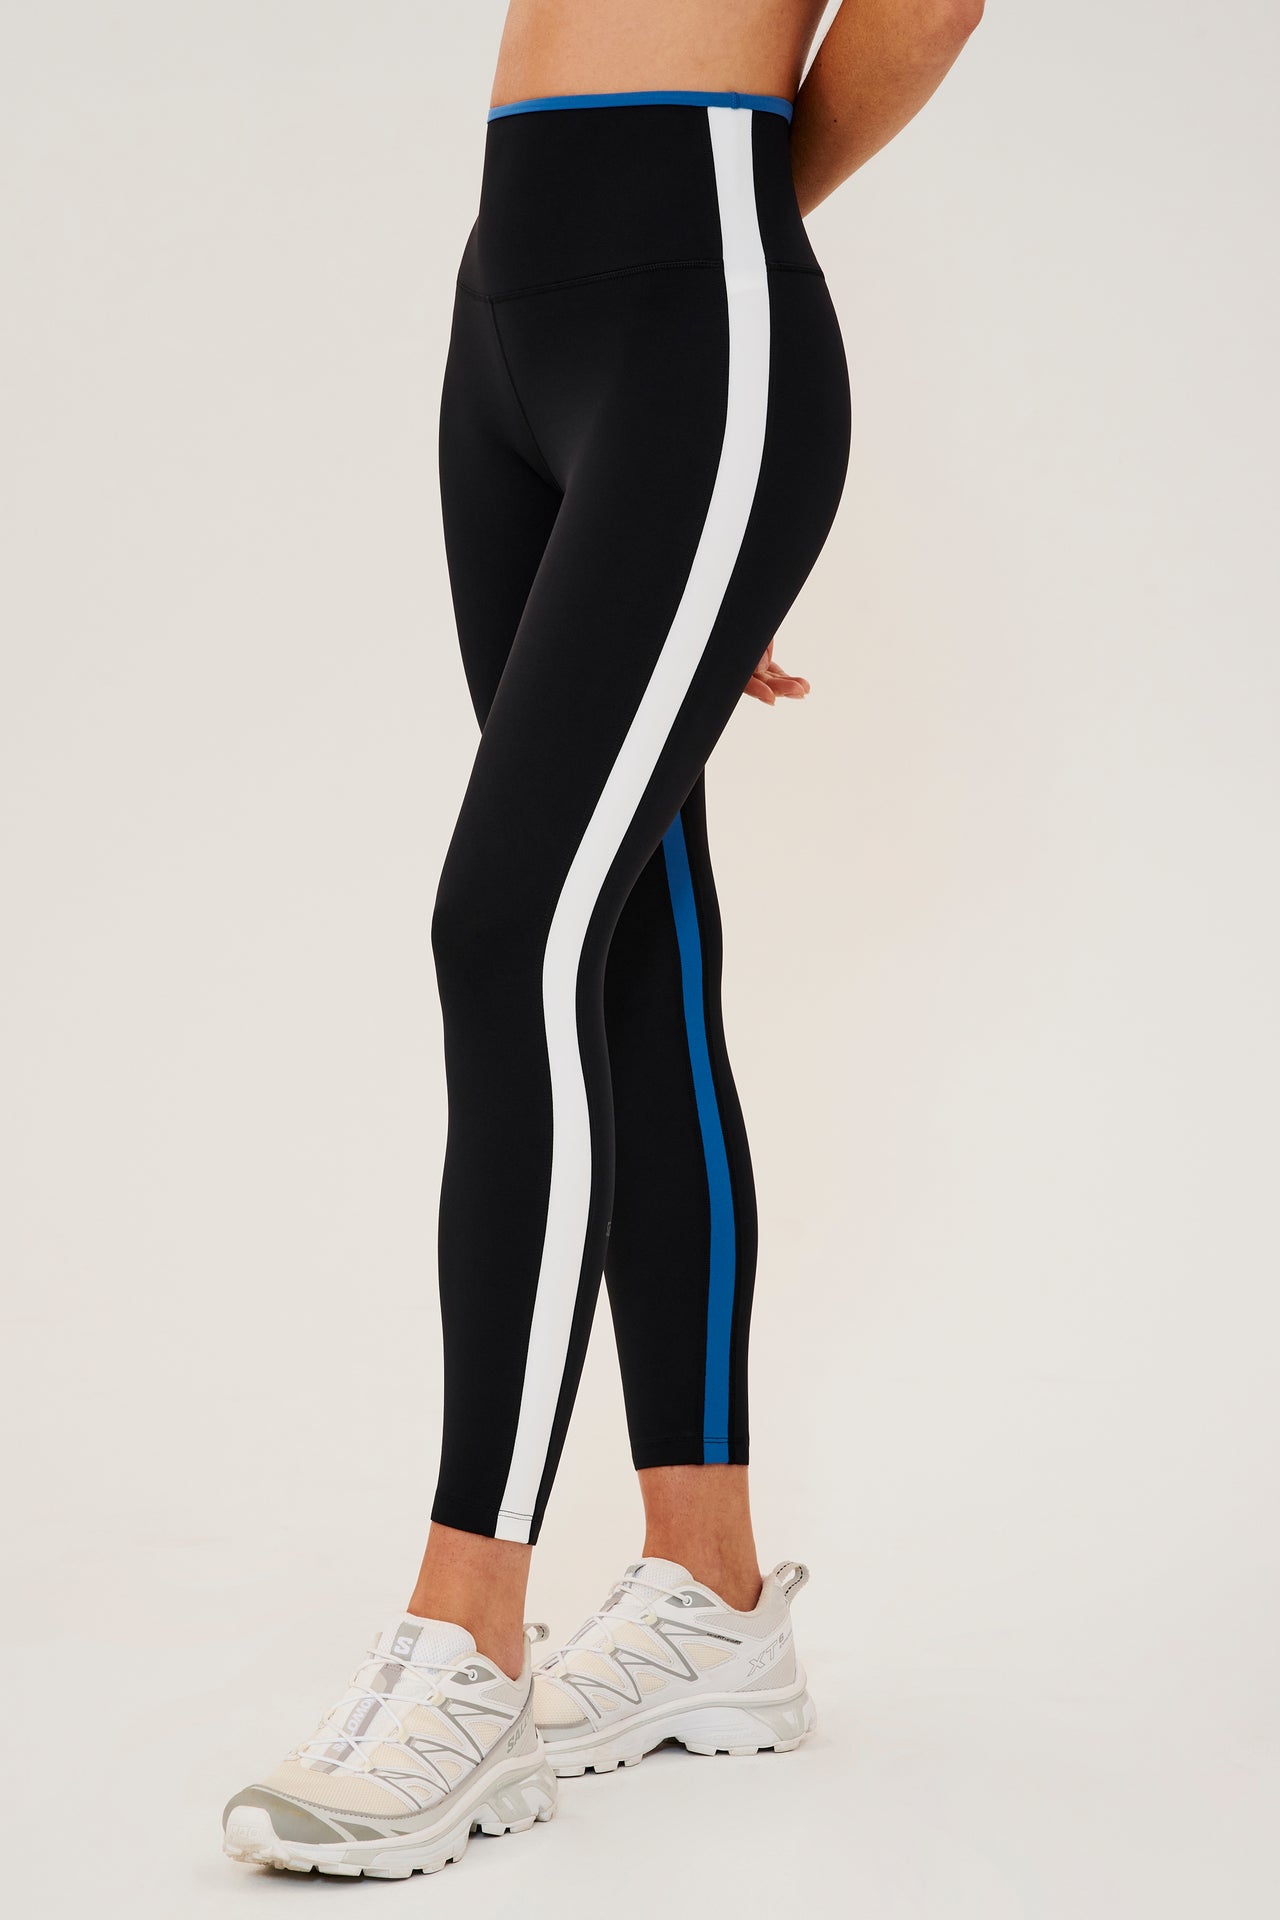 Front side view of woman wearing black leggings with bright blue and white side stripes with bright blue waistband. Paired with white shoes.